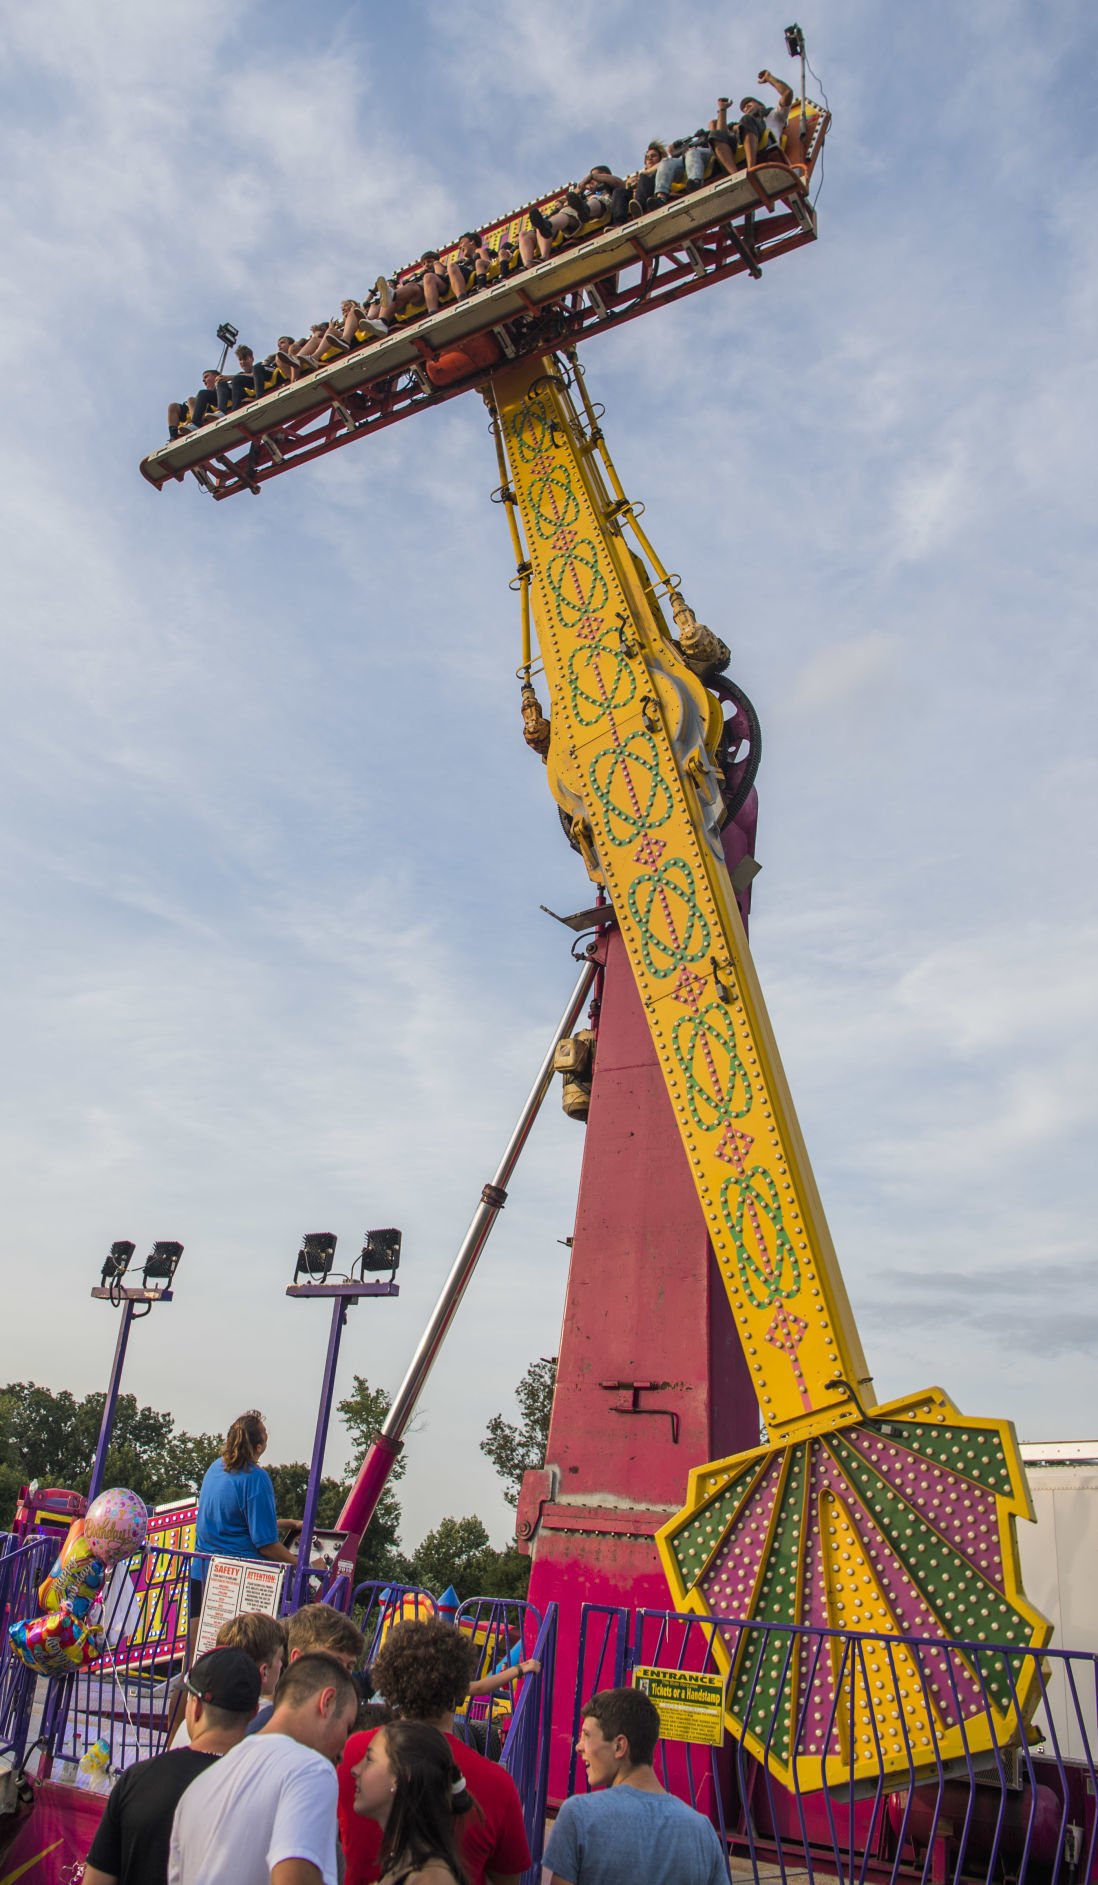 Amherst fair draws thousands, builds on a foundation centered in fun